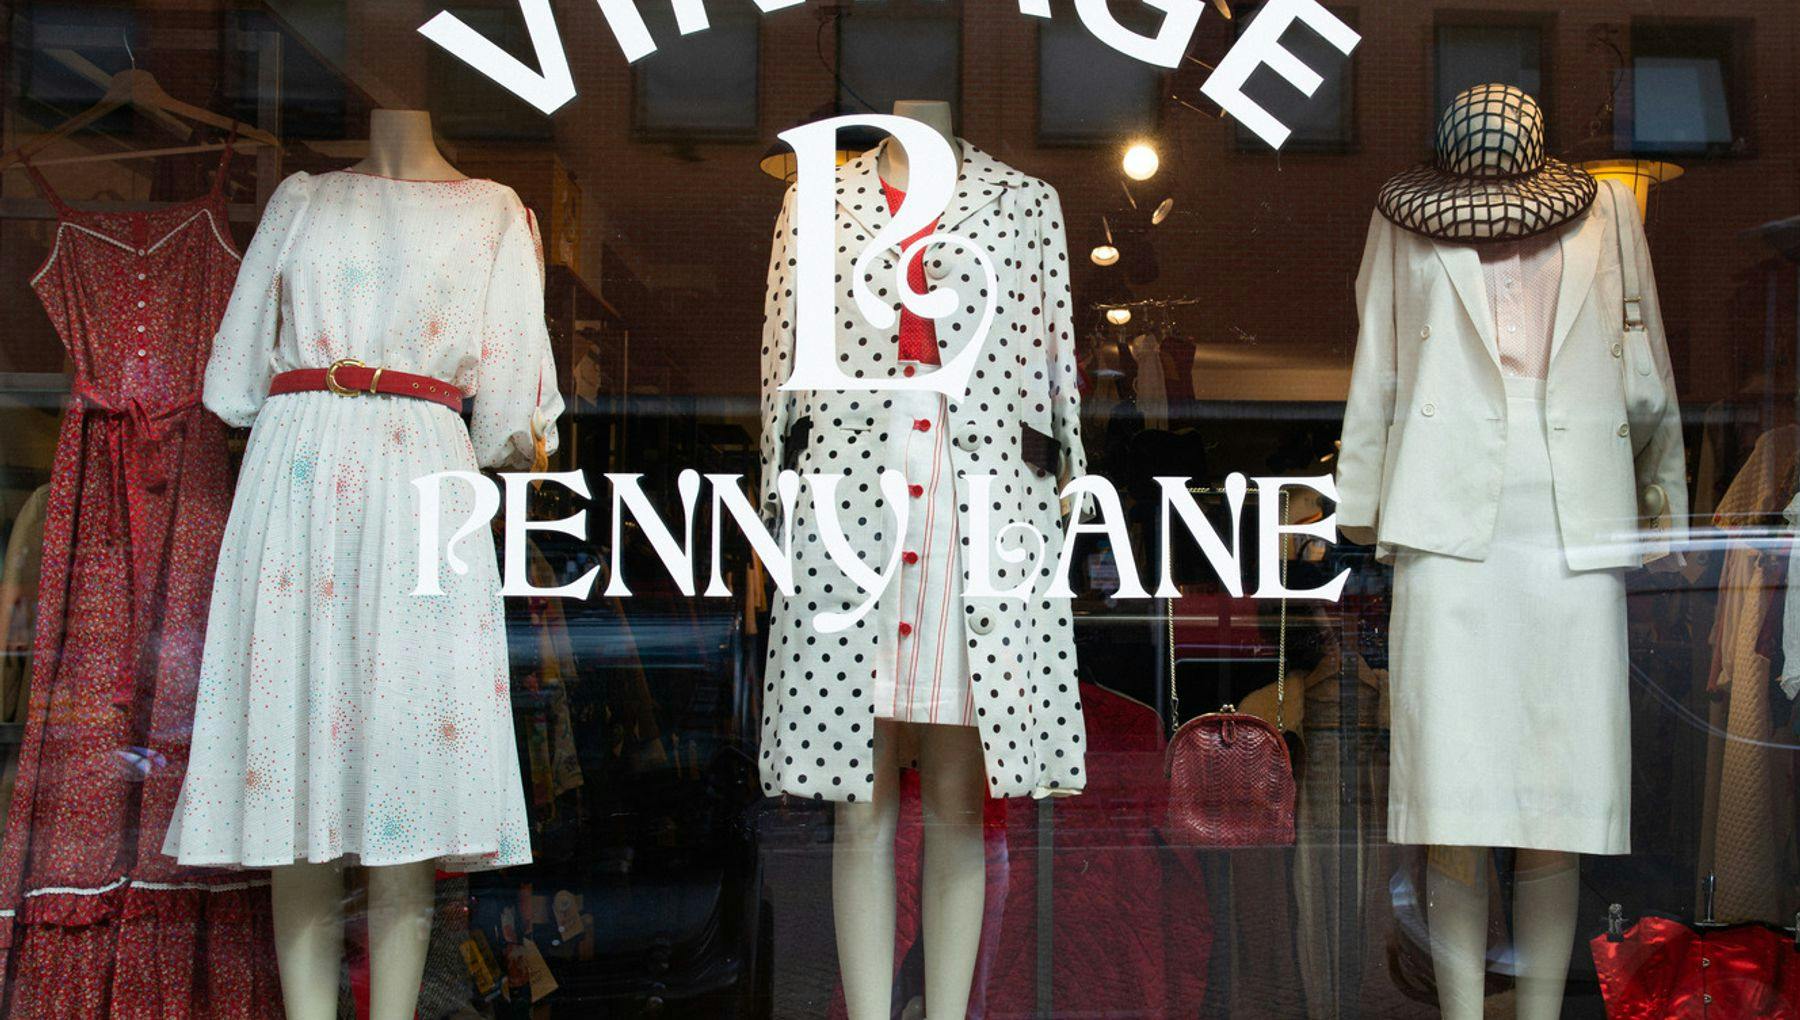 Vintage clothing in the shopwindow.